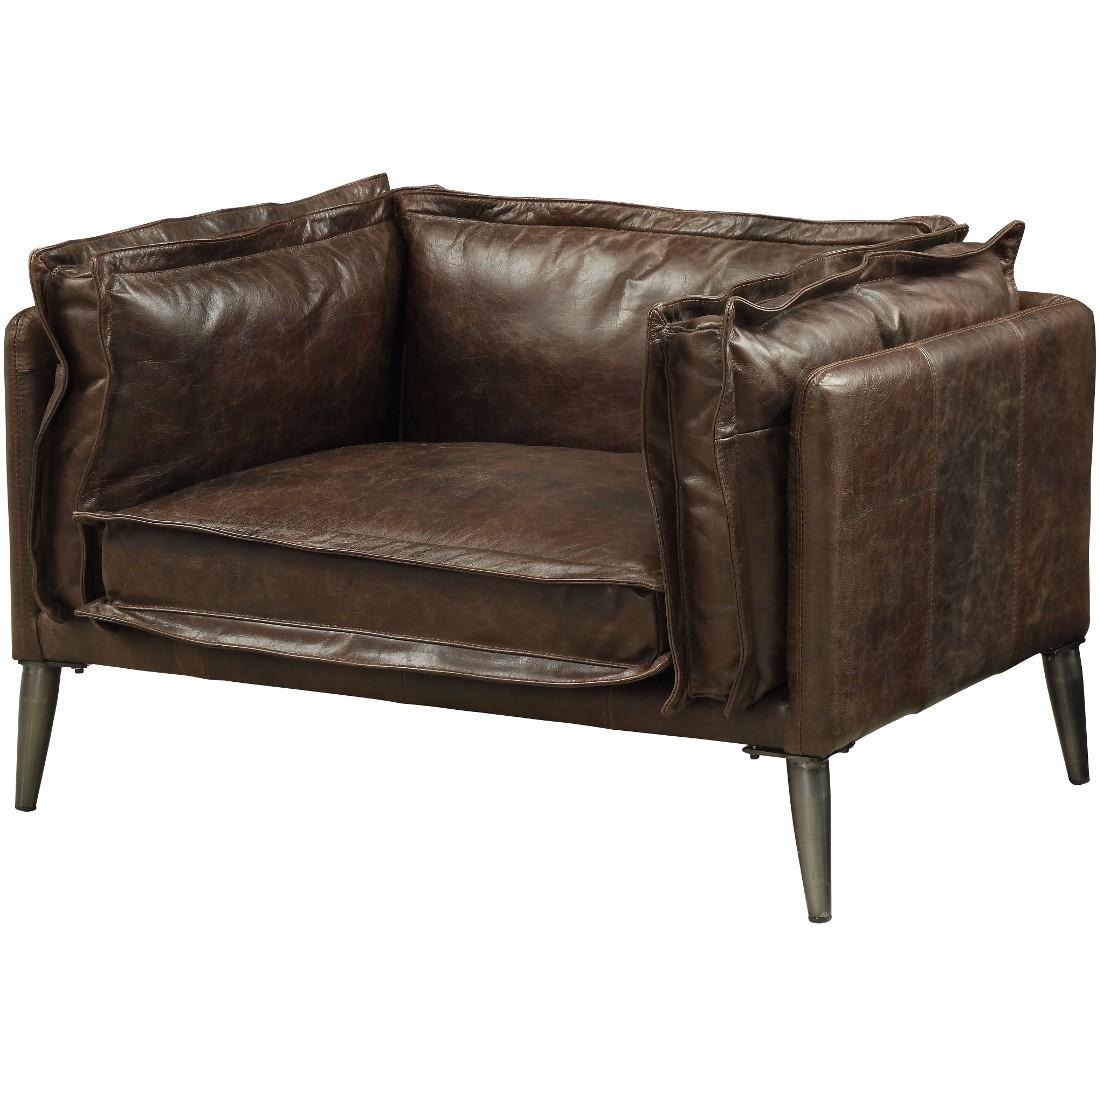 Contemporary Oversized Chair SKU: W004086408 SKU: W004086408 in Chocolate Top grain leather